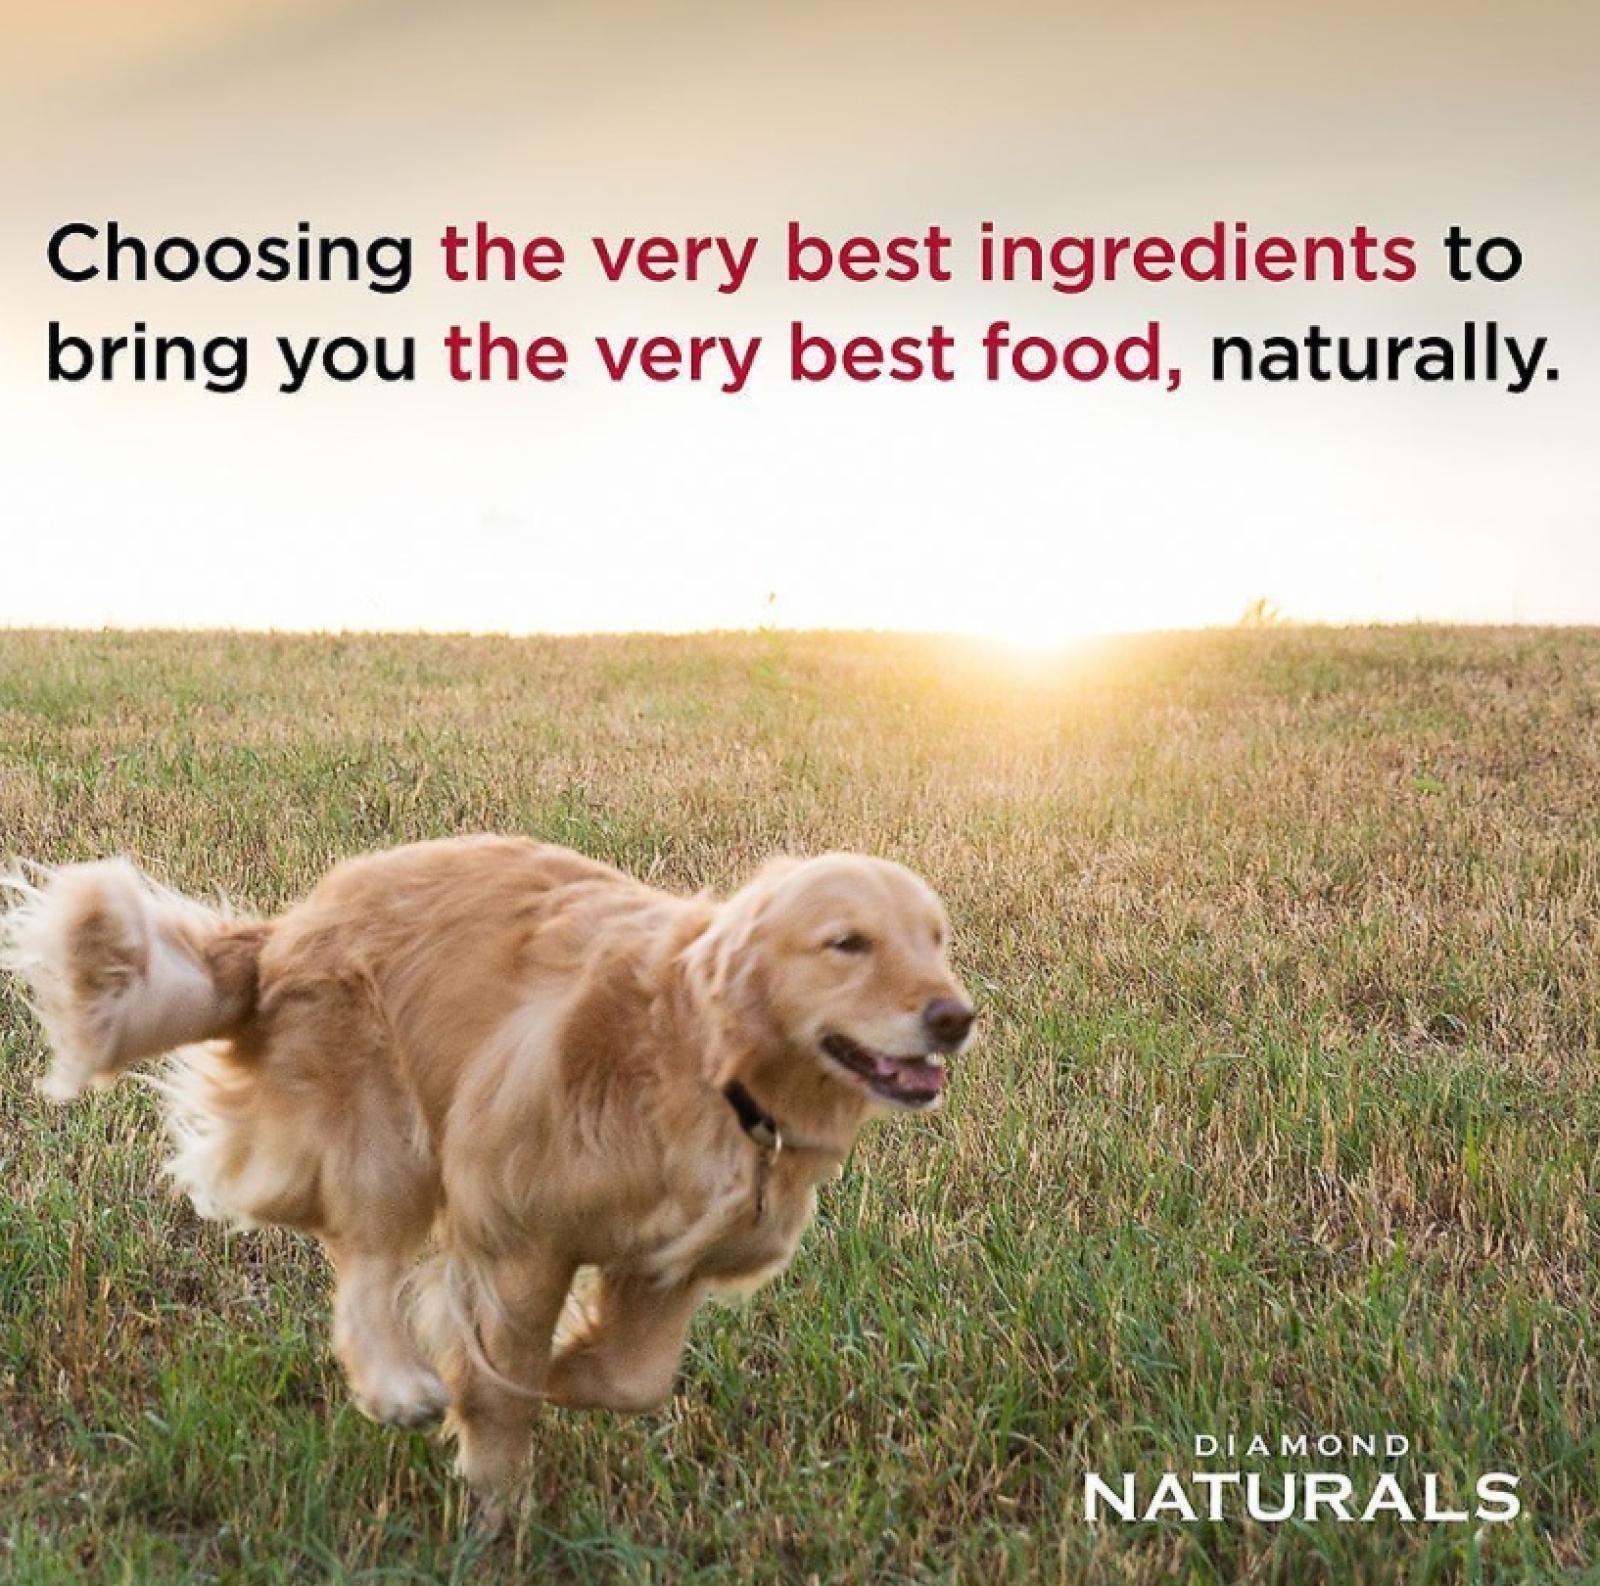 Diamond Naturals Chicken & Rice Formula All Life Stages Dry Dog Food Info